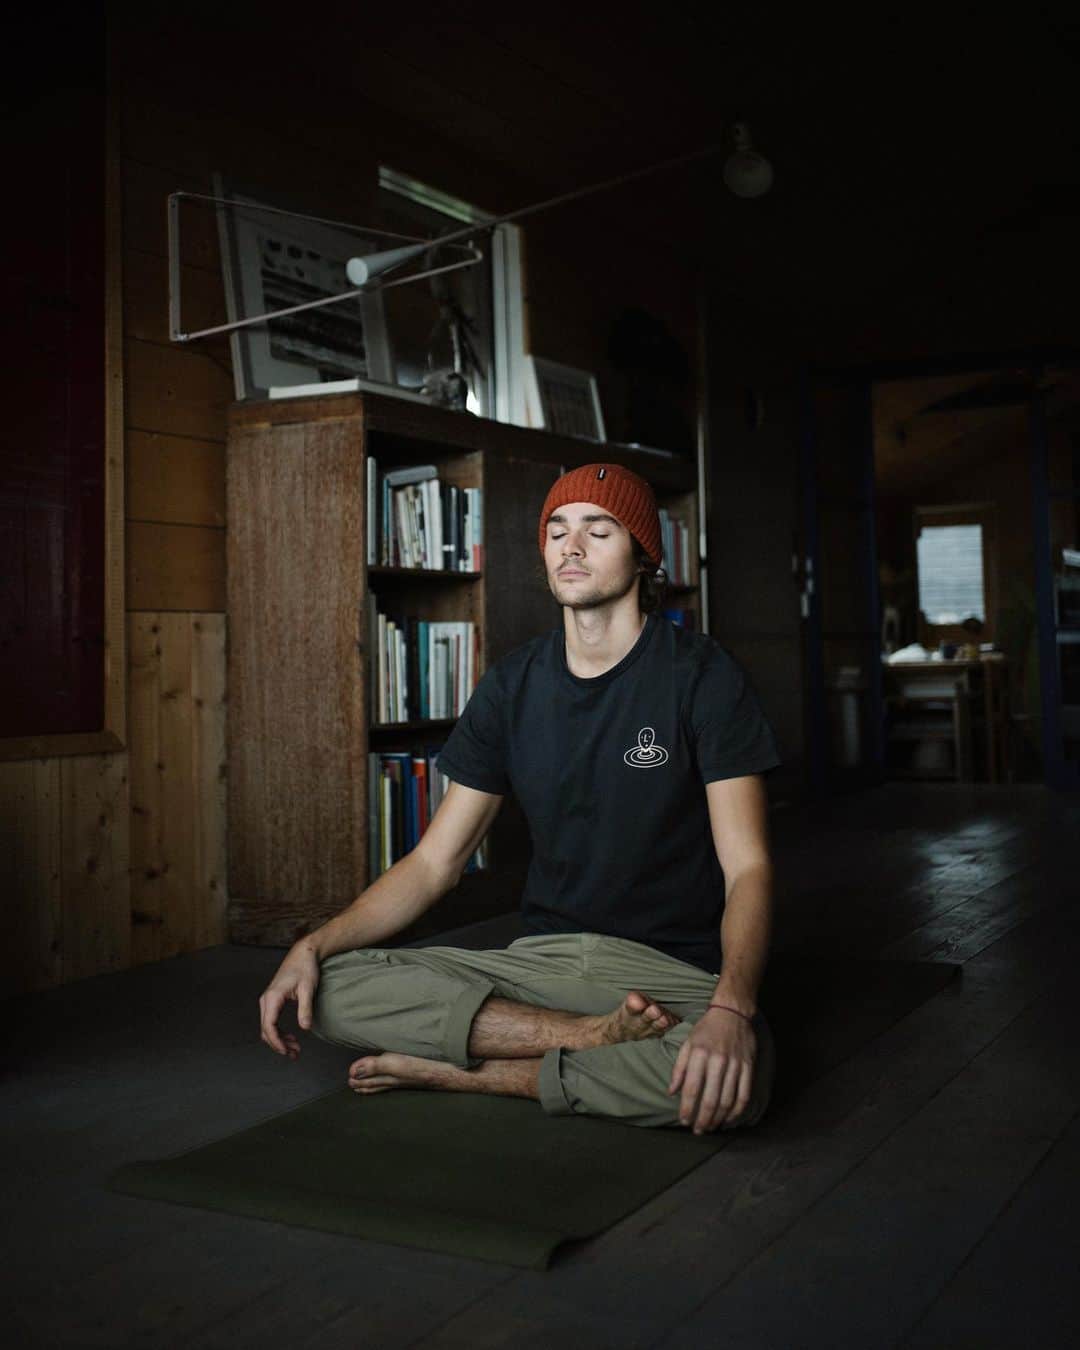 Jackson Harriesのインスタグラム：「As we get stuck into another month long lockdown here in England I wanted to share a few things that have helped my mental health this year. None of them are new ideas, but I’ve found that actively practicing them on a daily basis can have an incredible effect.   Yoga   I’ve always enjoyed yoga but have never really found the time to develop a consistent practice.  During lockdown I’ve started doing virtual classes with the @sangyeyogaschool and it’s been such a source of comfort. I’m particularly grateful to @em.jivamukti for her constant guidance and teachings.  Breathing   Breathing sound like an obvious one. We all do it everyday, but how often do you take the time to become conscious of your breath? Recently I’ve discovered @breathewithjames and the immense power of the breath to calm your body and mind. James hosts regular sessions a few times a week and I can’t recommend them more highly.  Meditation  There are of course many different schools of meditation, and many different ways to practice. I’ve always found the @headspace app a really great resource if you’re wanting to develop a simple guided daily practice. I often go for periods of time without mediating but whenever I come back to it - even if its just for five minutes - I’m reminded of the power of it.   Ultimately all these practices are a reminder that whilst we can’t always control what goes on outside, we can control our mindsets and how we respond to change.   I also wanted to say a huge thanks to @soweflow who make amazing yoga gear specifically aimed at men. The yoga twill trousers I’m wearing in these pictures are literally the comfiest things I’ve ever owned and have been a staple of my lockdown closet.    I’d love to know what apps, teachers, websites or practices have helped you during the lockdown period. Stay safe and don’t forget to prioritise your mental health. 🧘‍♂️🌎」